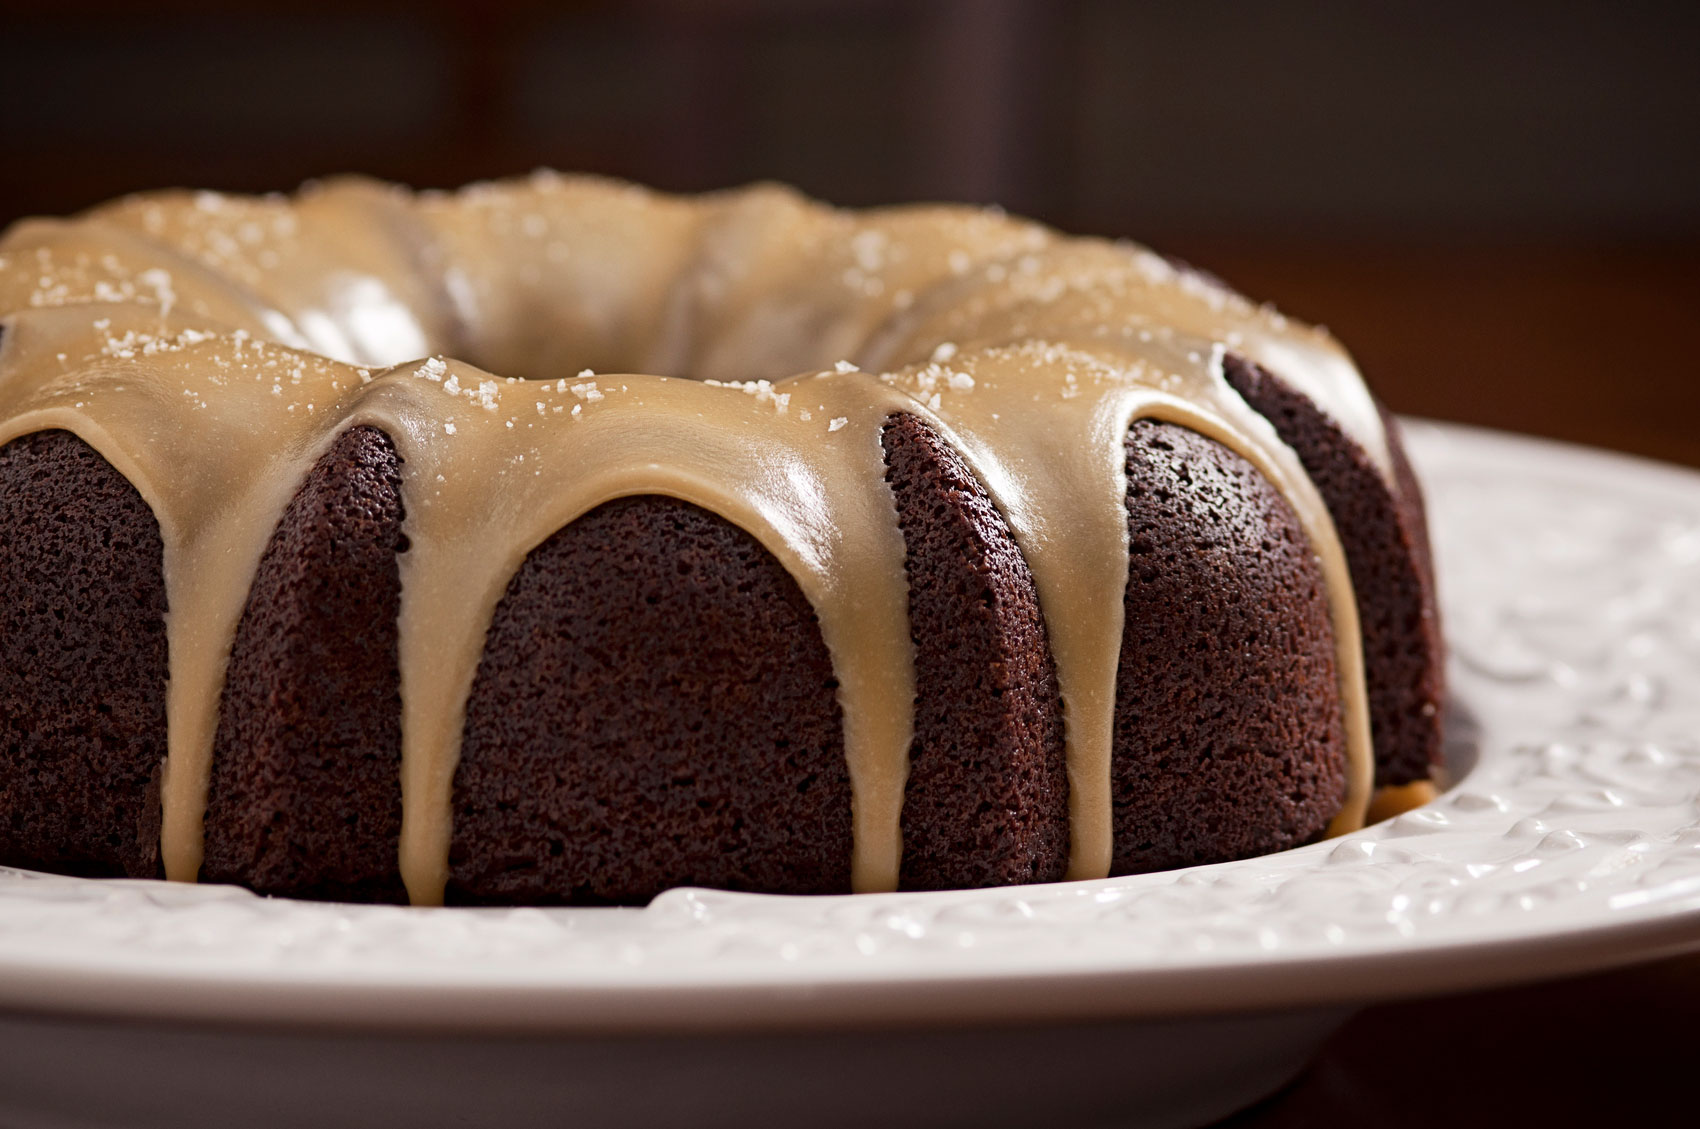 Gingerbread Stout Cake with Caramel Ale Sauce